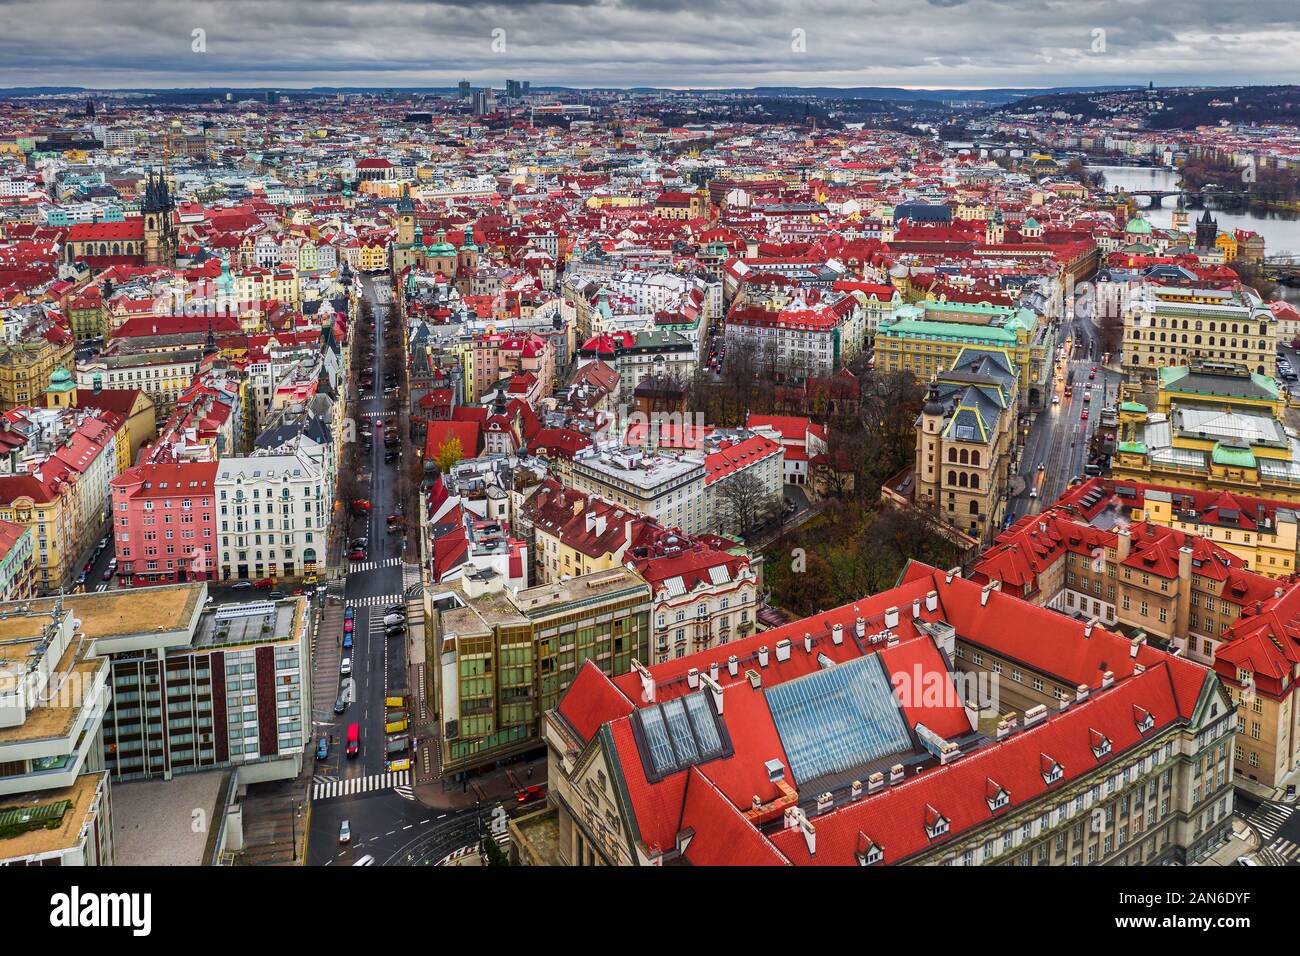 Prague, Czech Republic - Aerial view of the Old Town of Prague at Christmas time with Church of our Lady before Tyn, red rooftops and high streets Stock Photo